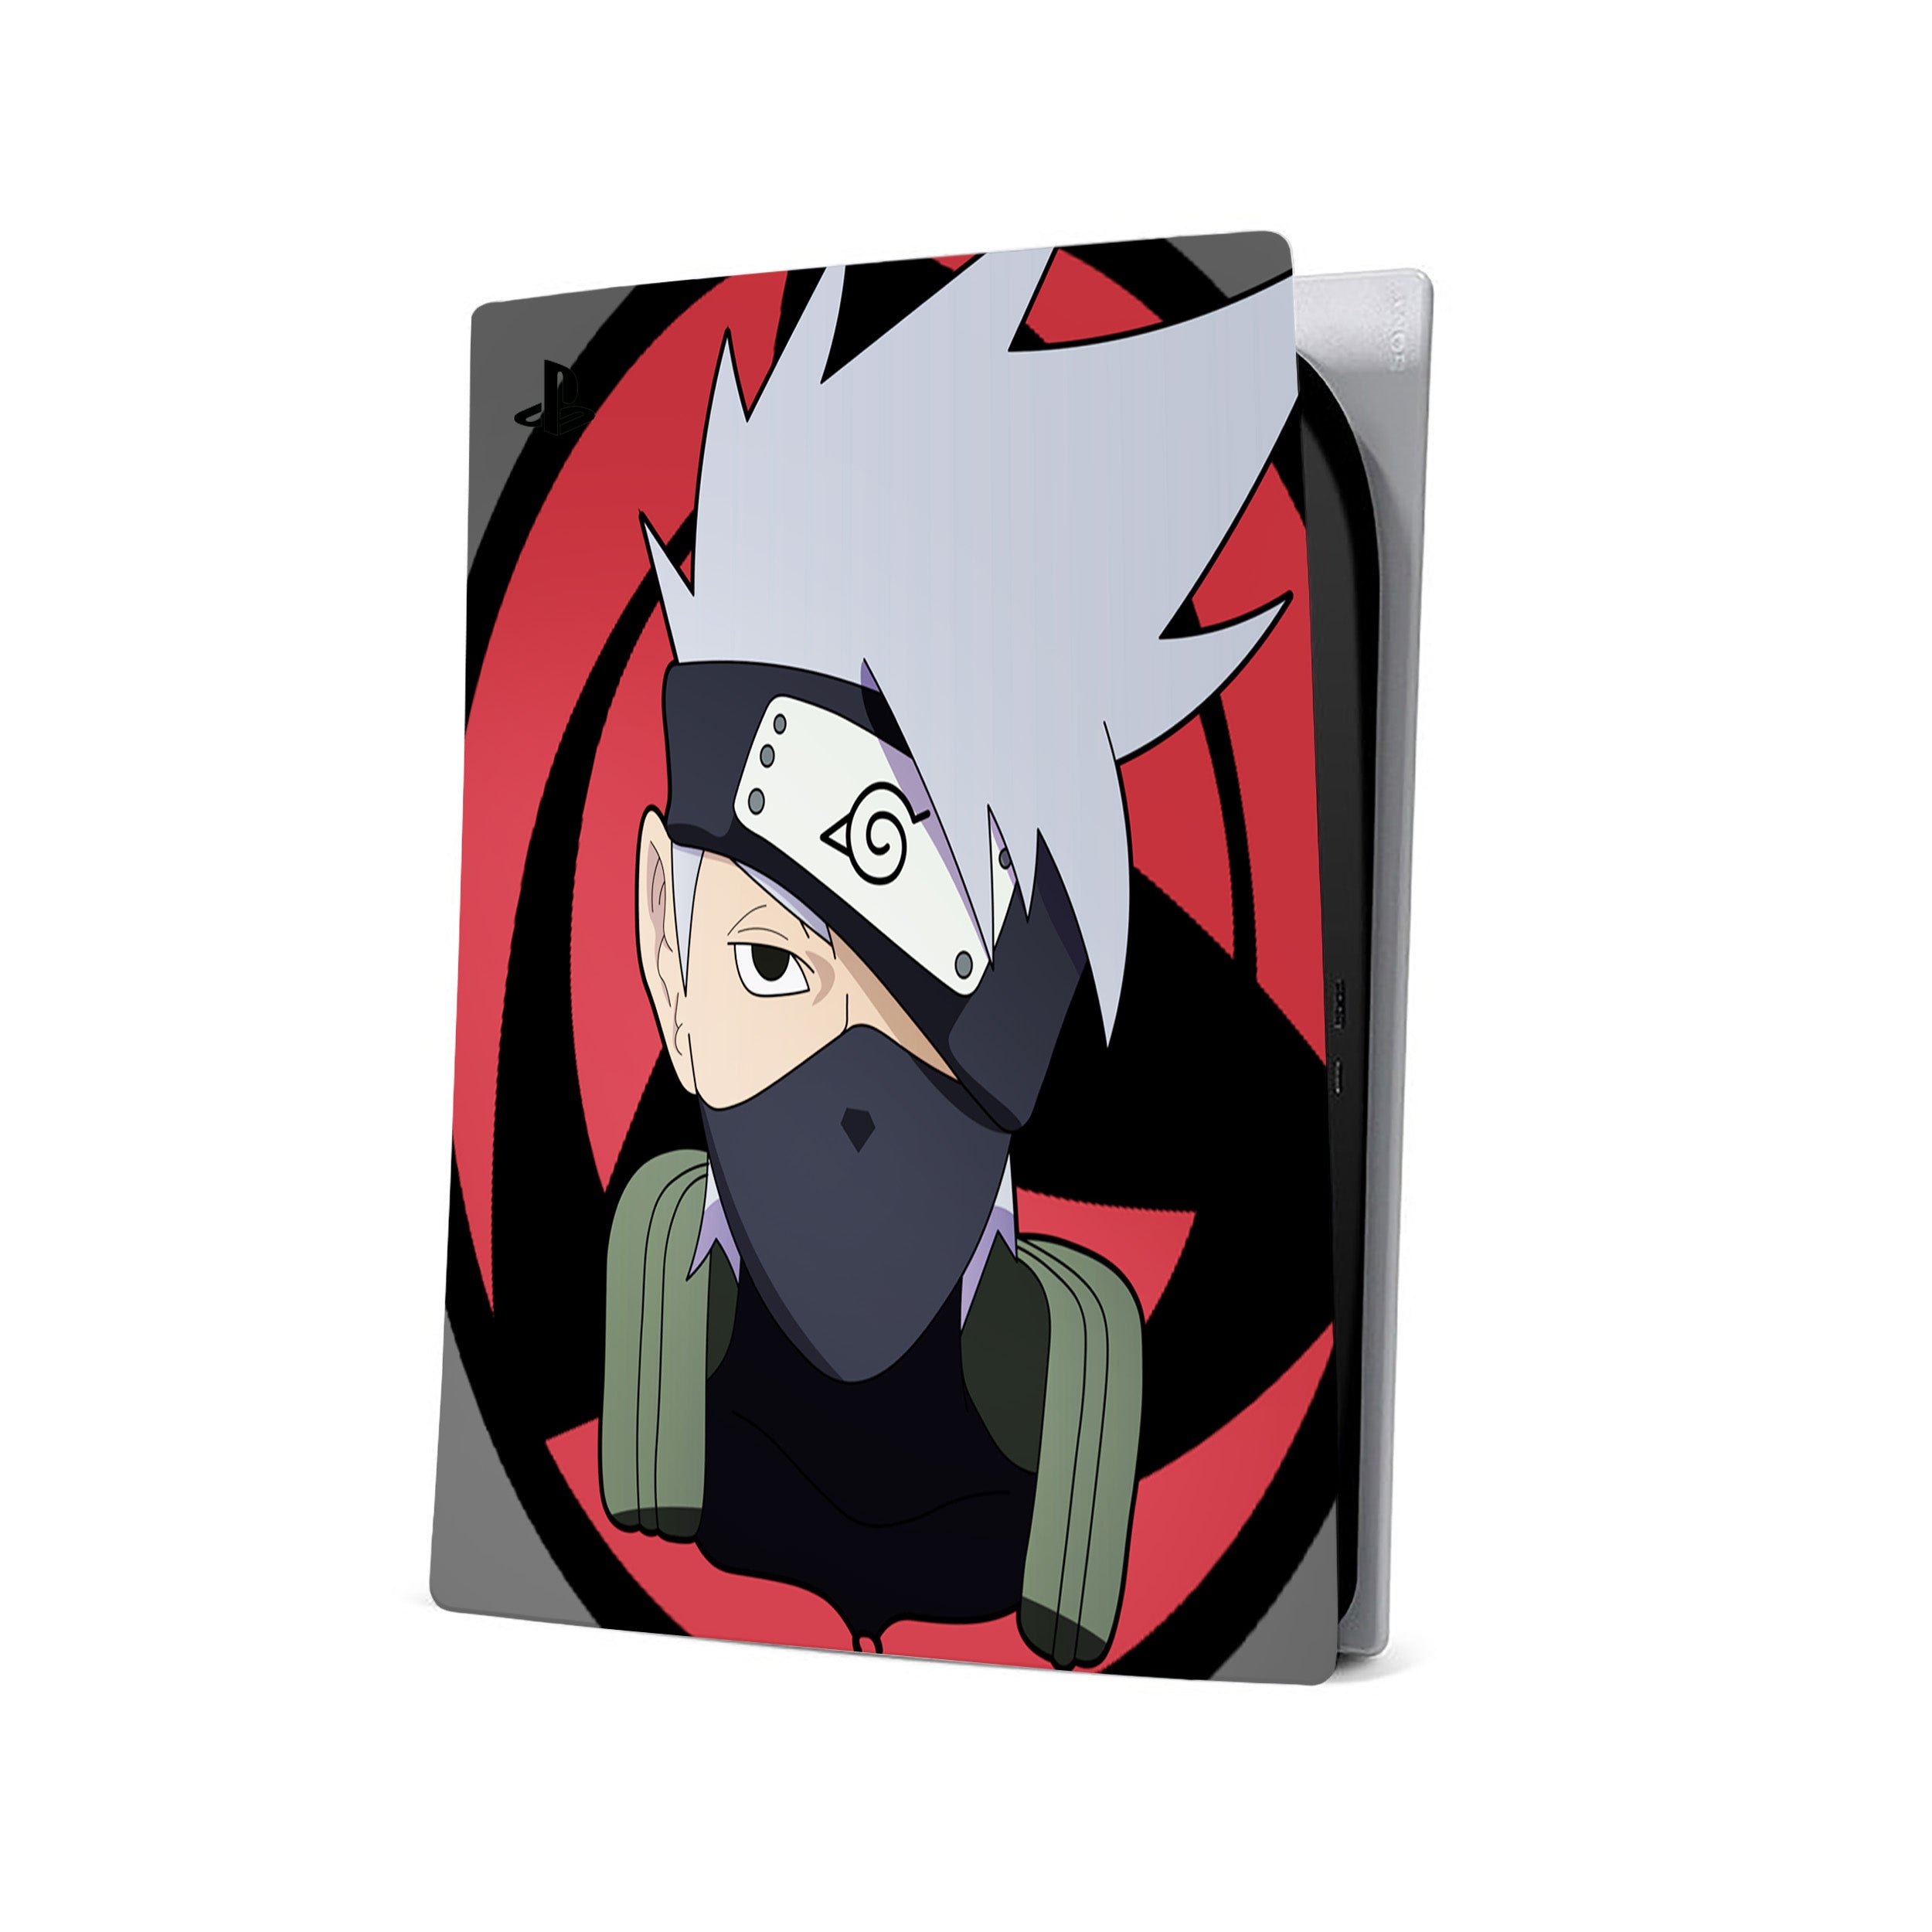 A video game skin featuring a Naruto Kakashi design for the PS5.